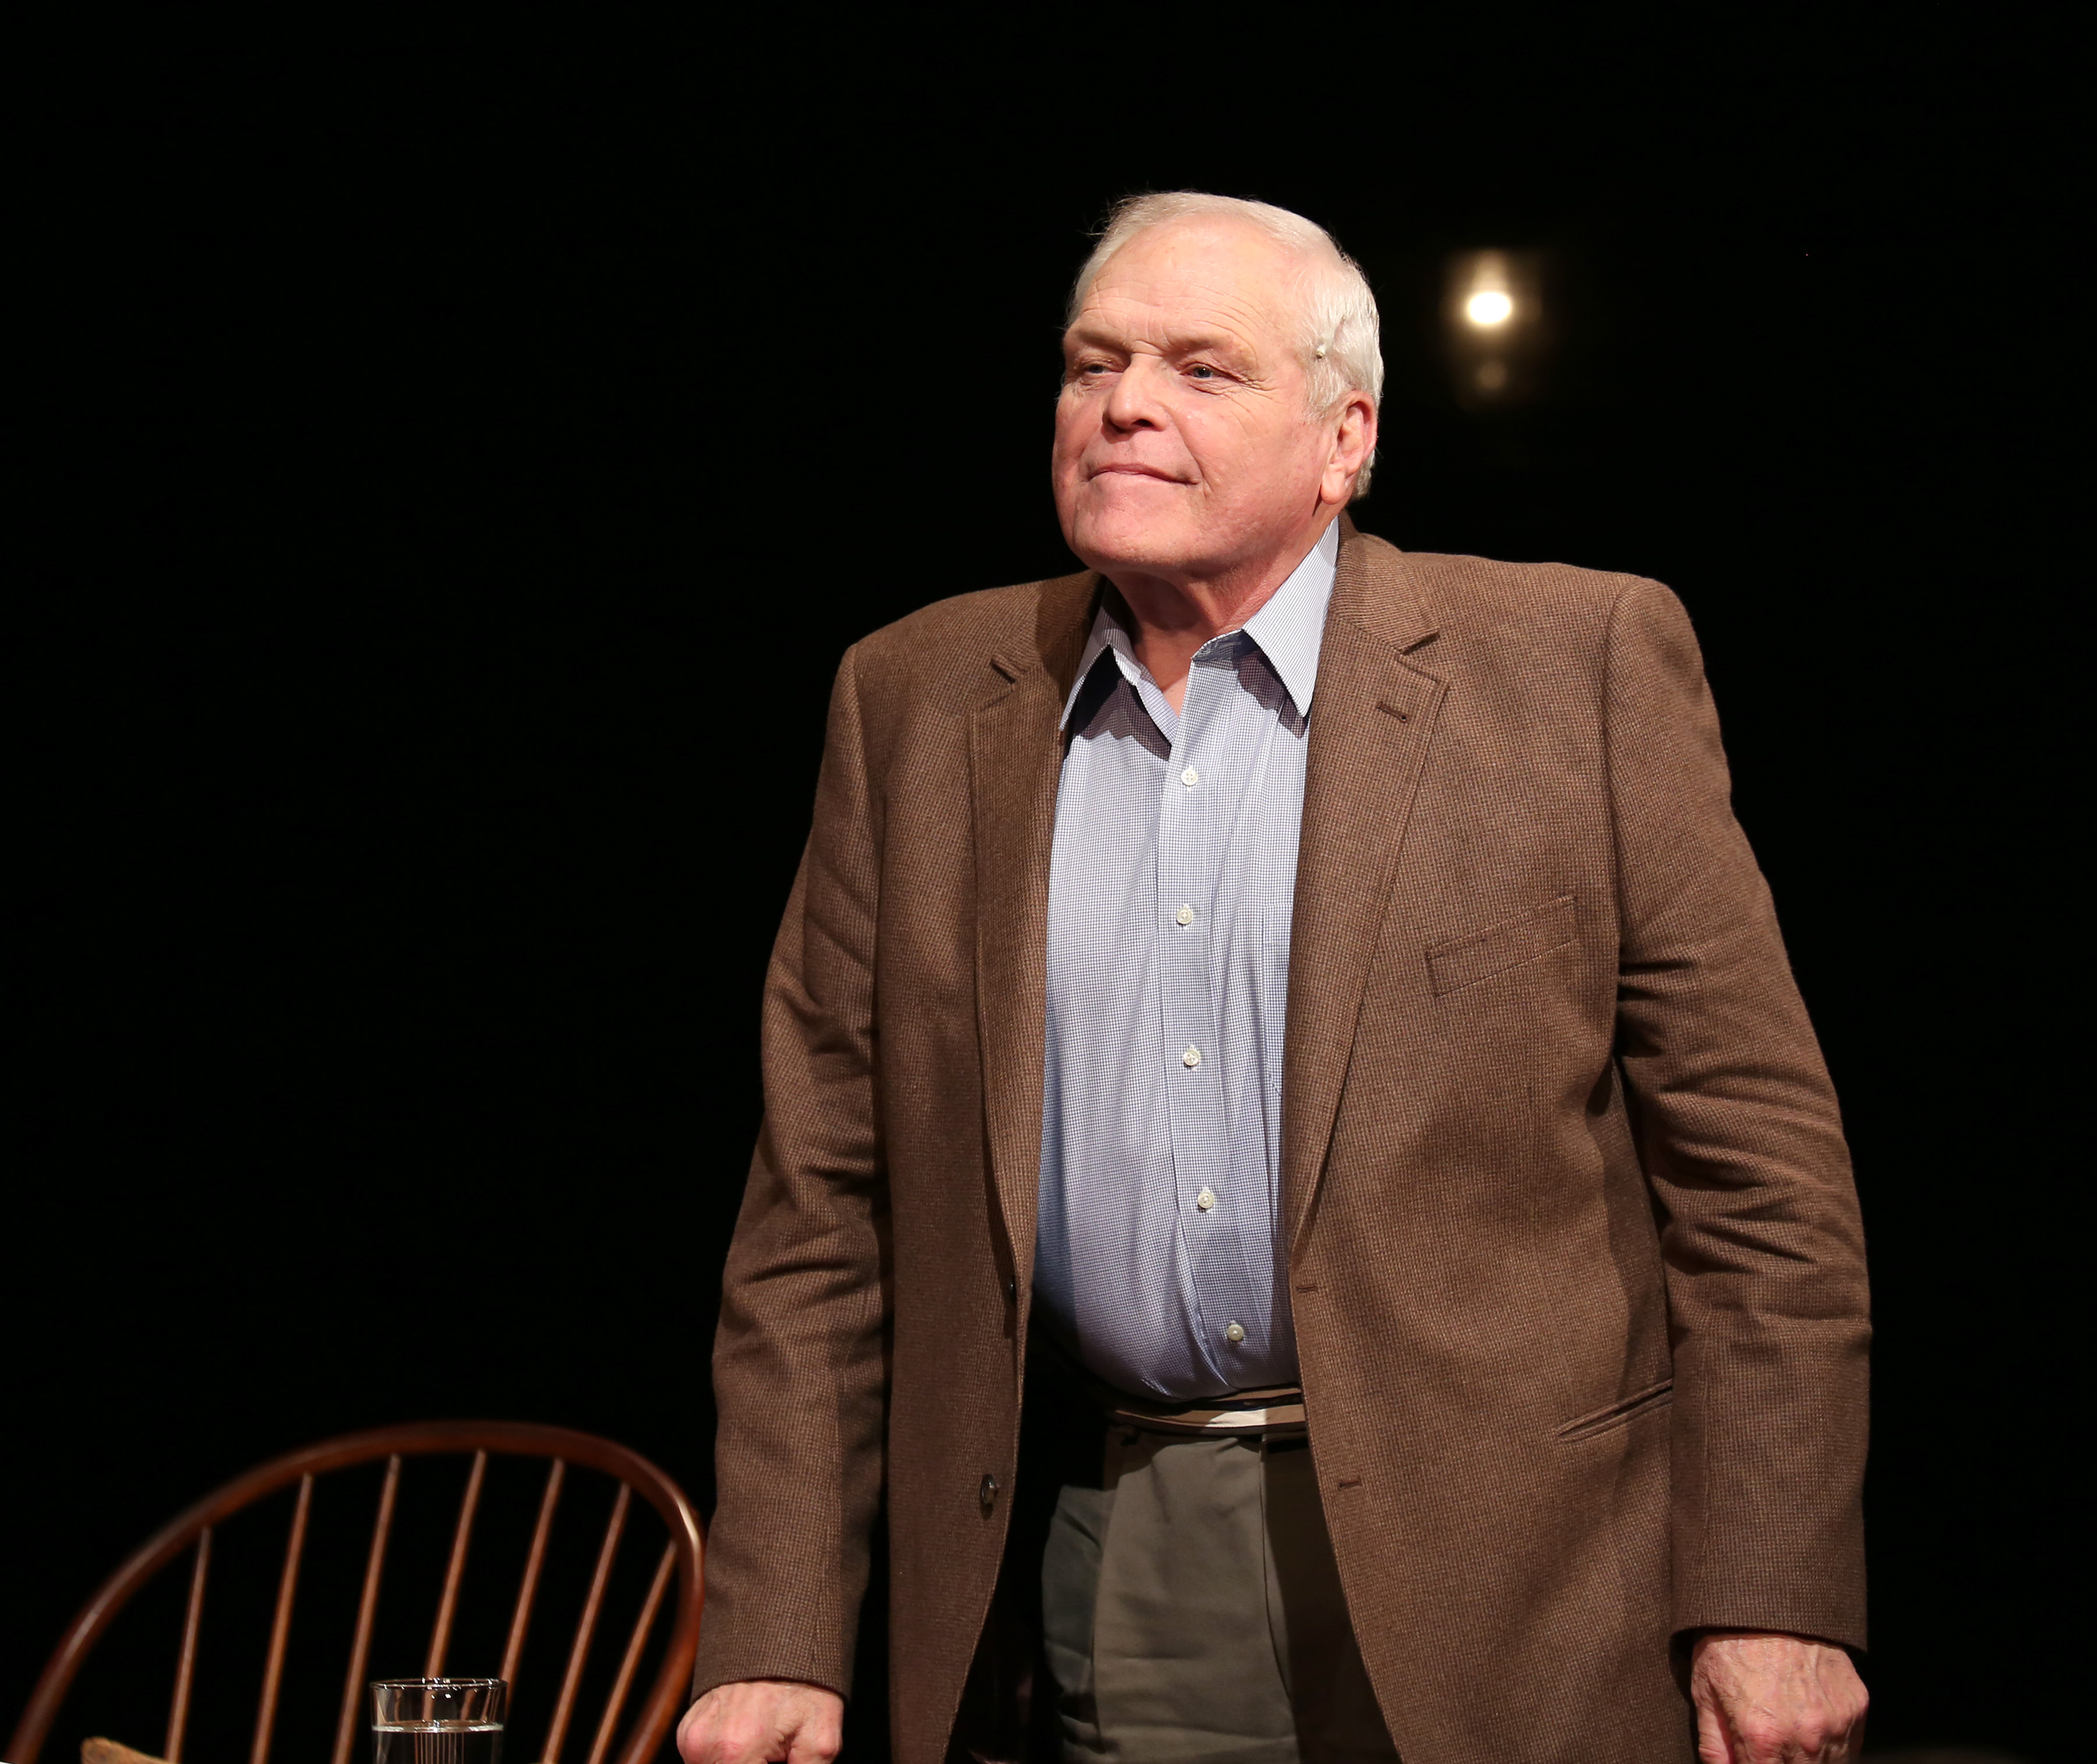 NEW YORK, NY - SEPTEMBER 18:  Brian Dennehy during the Broadway opening night performance curtain call of 'Love Letters' at the Brooks Atkinson Theatre on September 18, 2014 in New York City.  (Photo by Walter McBride/WireImage)